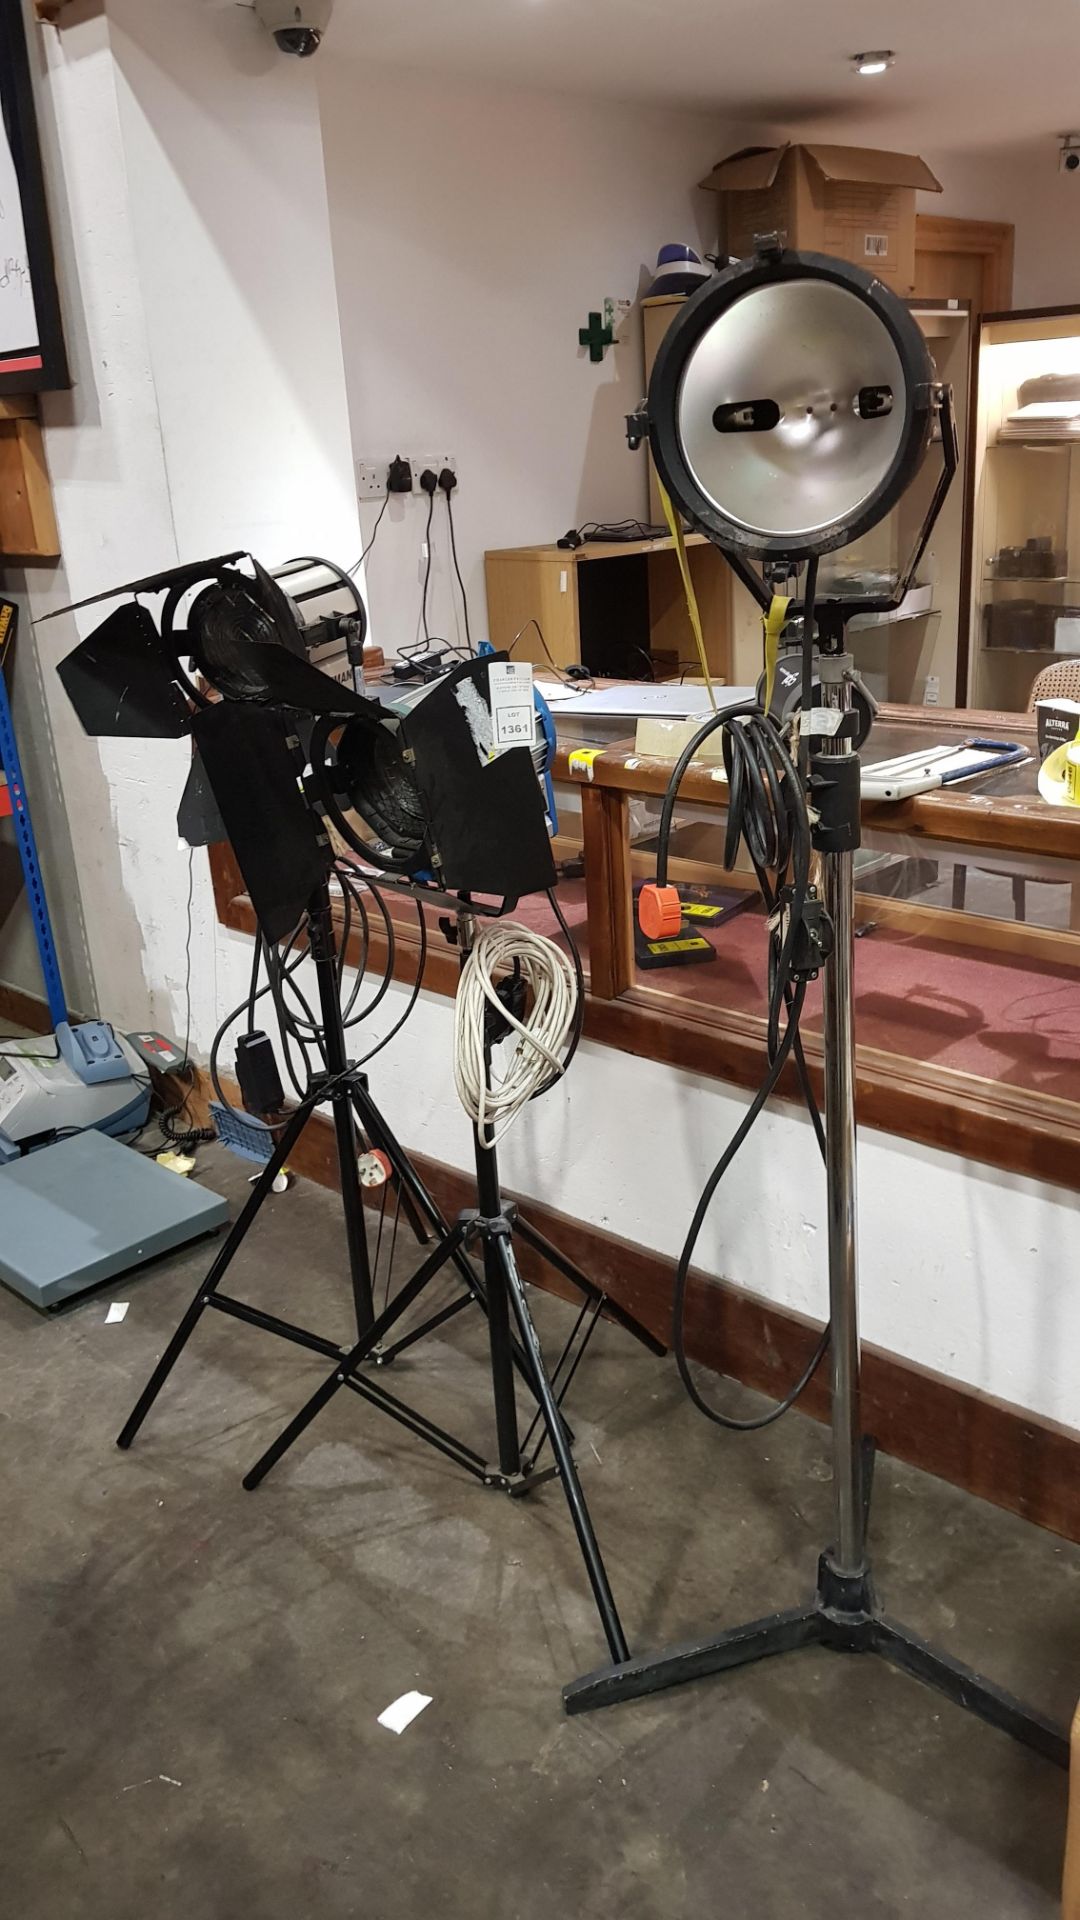 3 X PHOTOGRAPHY LIGHTS IE ALTMAN 1000L IANEBEAM 2KW MODEL 3150 240V AND 1 X UNNAMED LIGHT